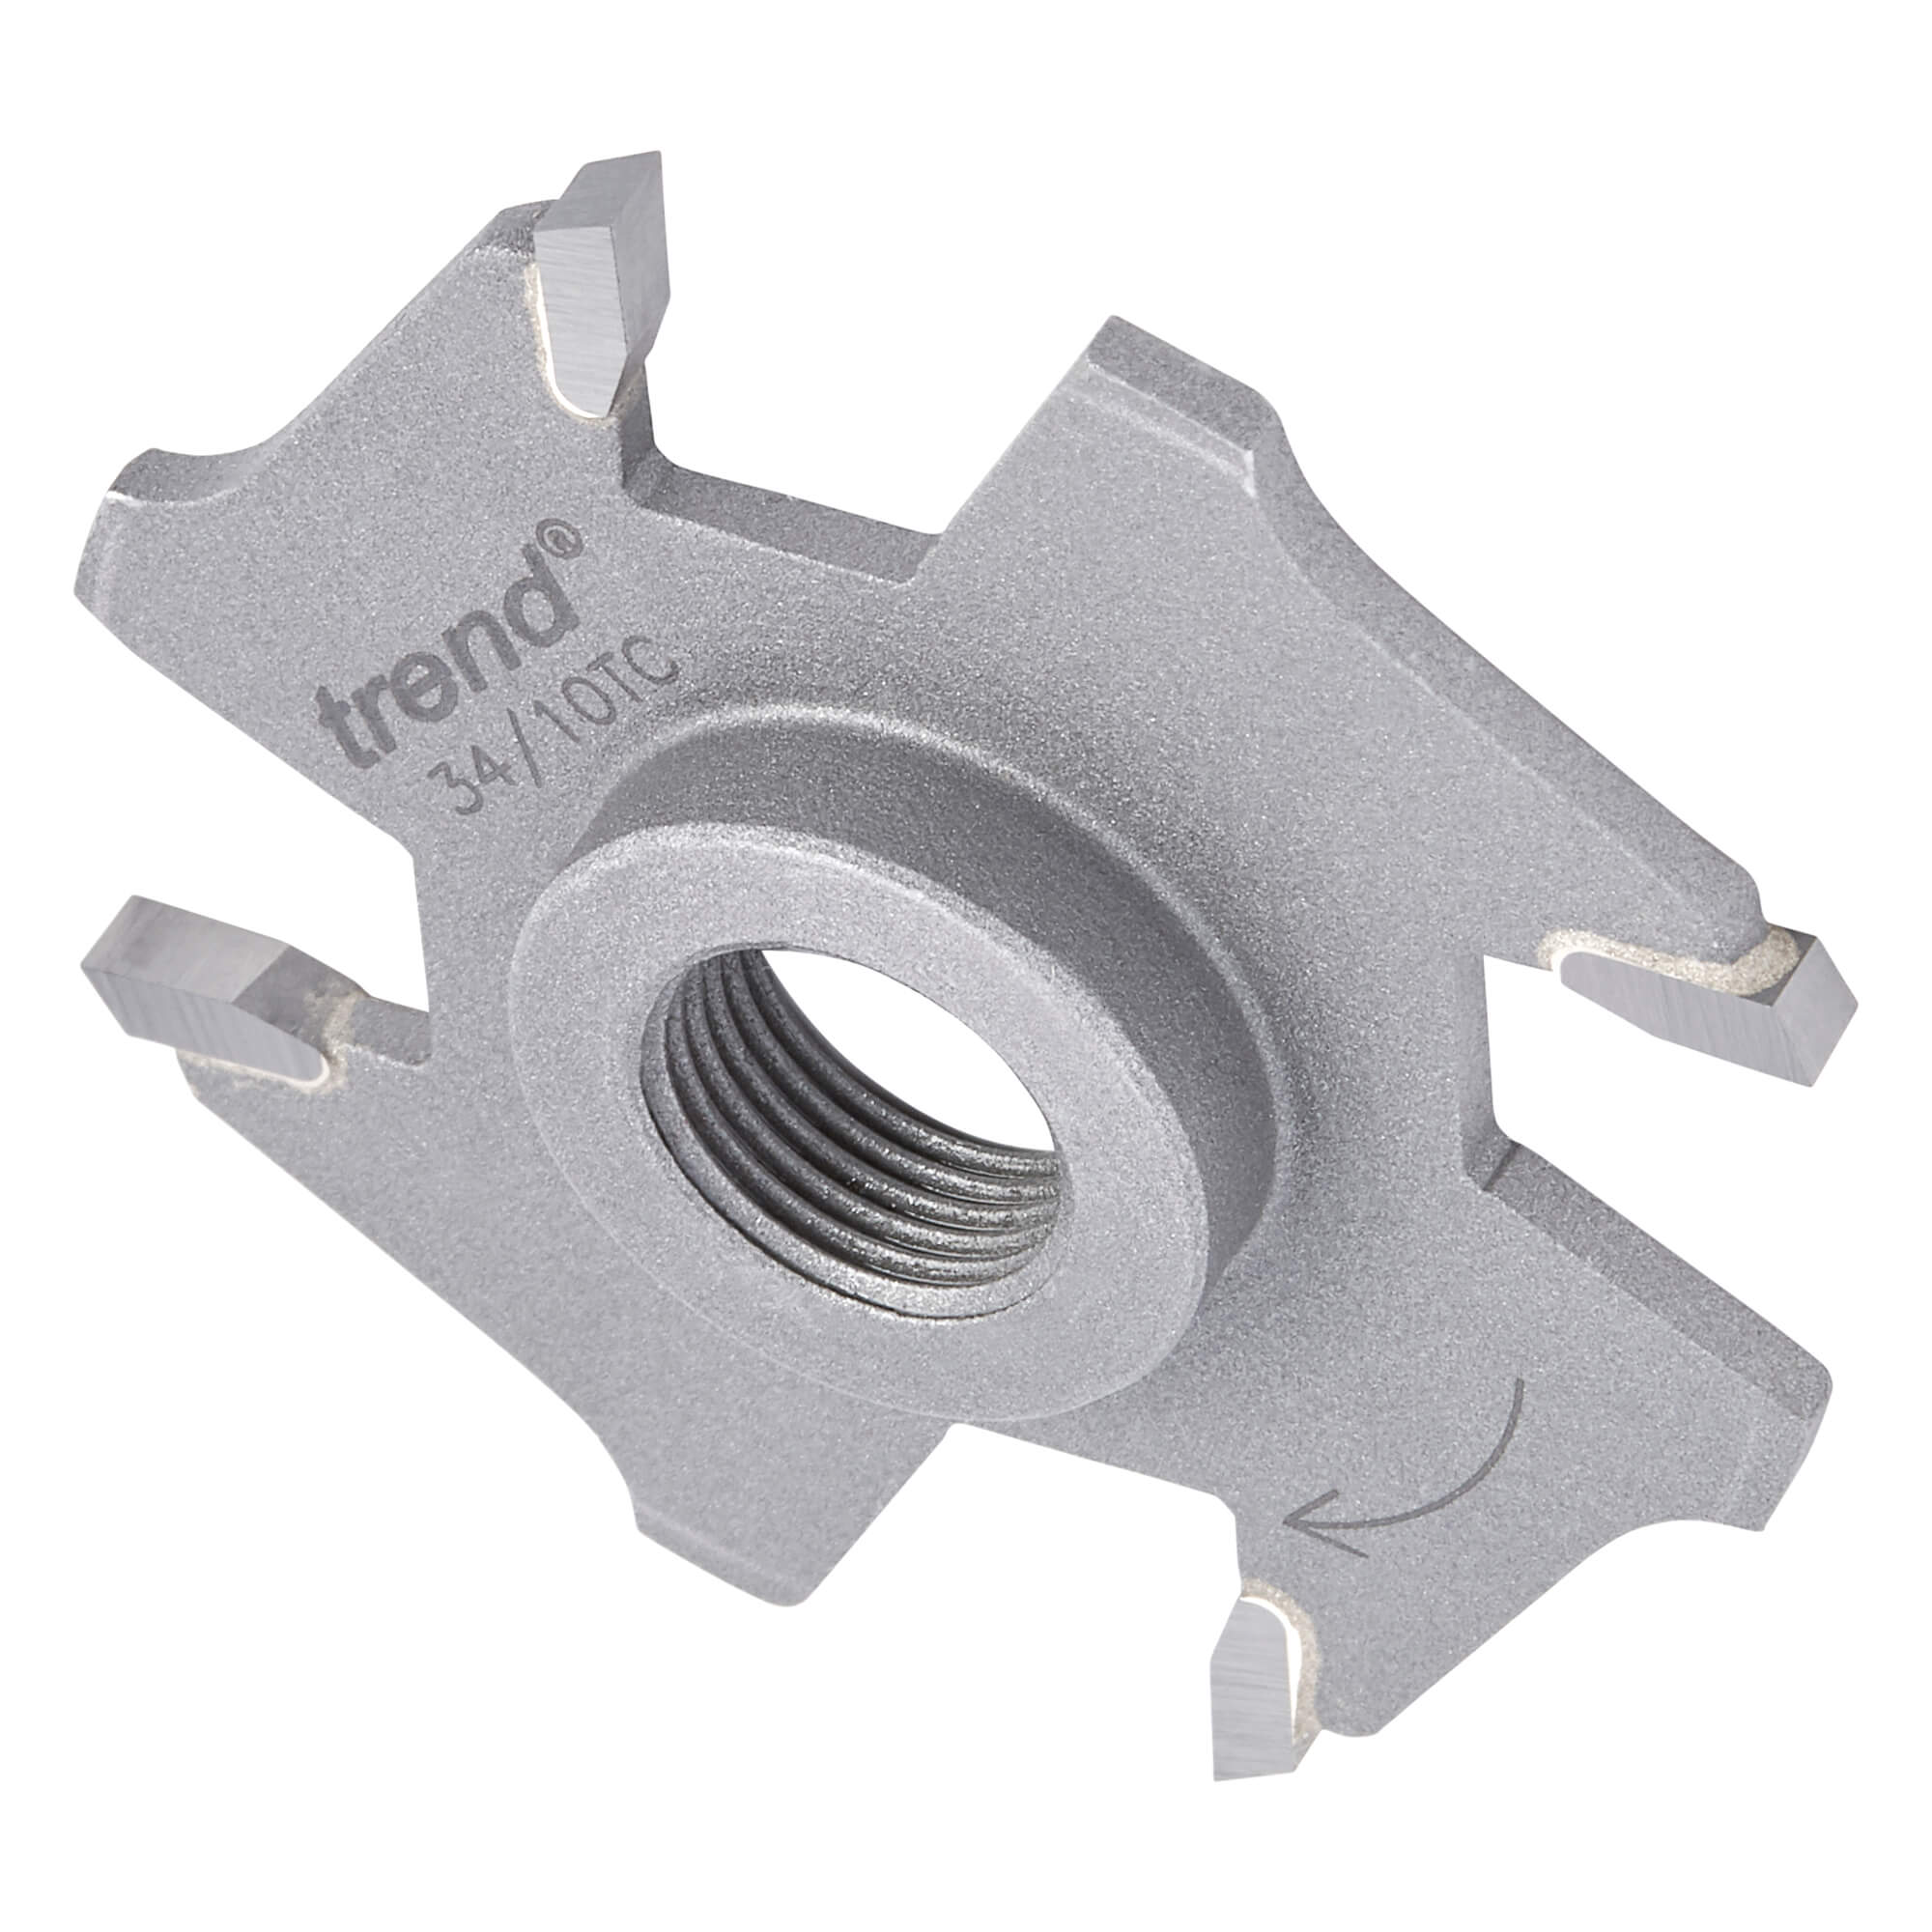 Image of Trend Threaded Slotter Blade for 33 Series M12 Arbors 50mm 3mm M12 Thread